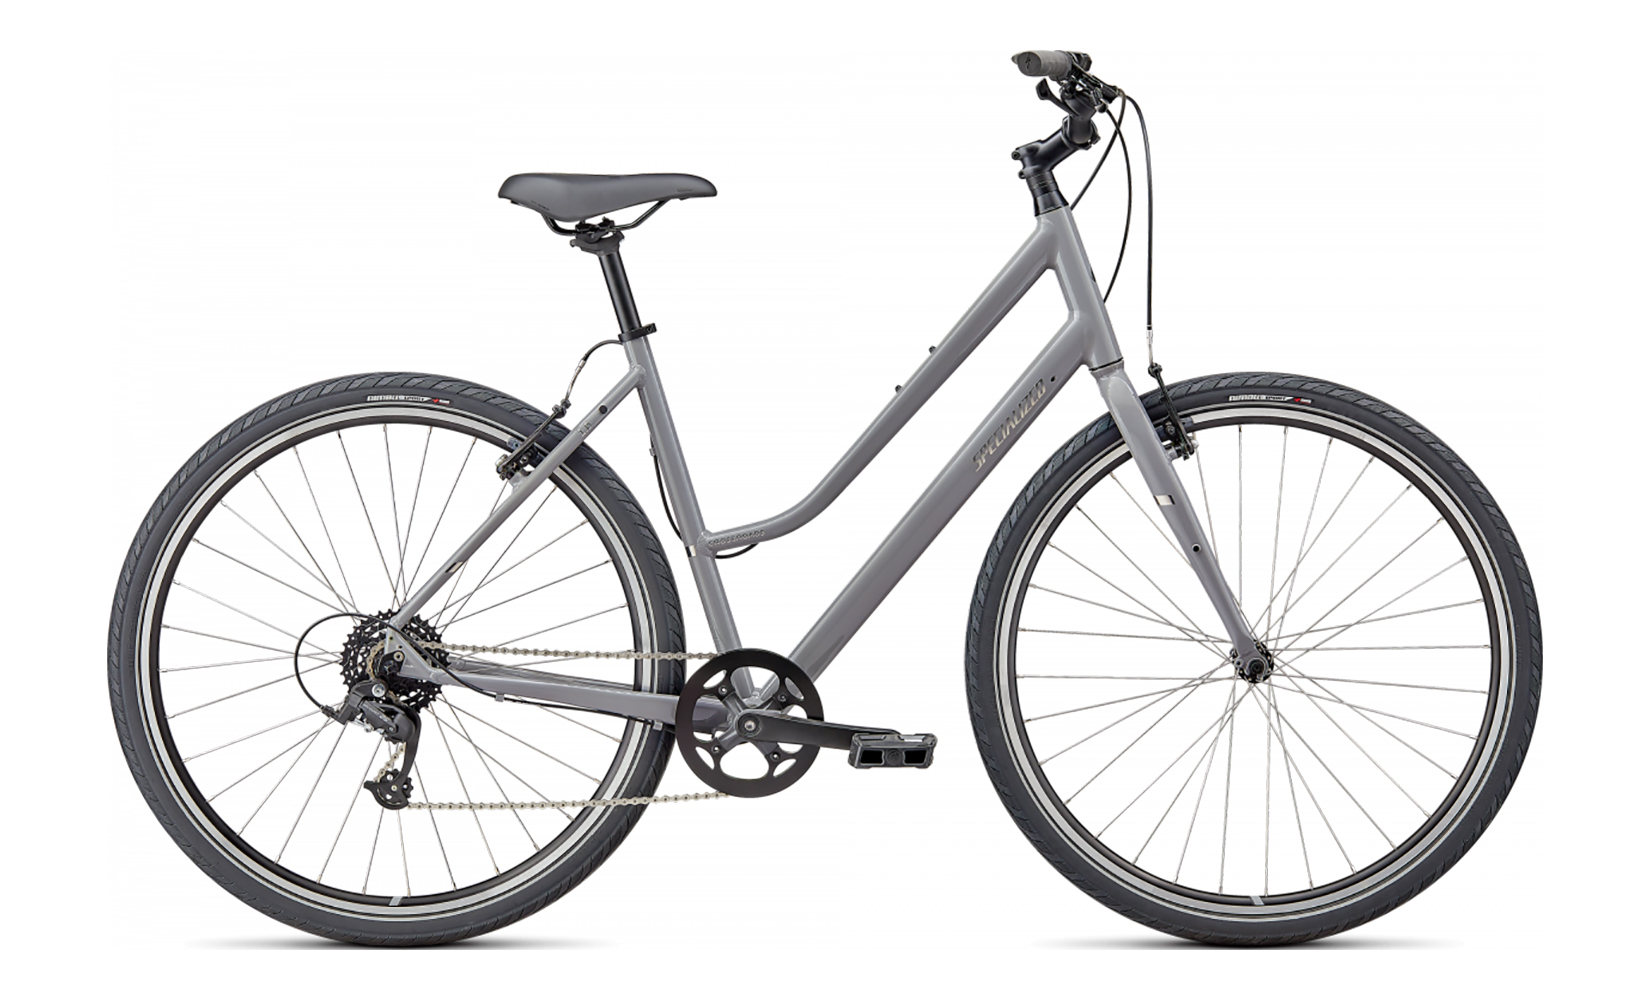  Specialized Crossroads 1.0 ST (Gloss Cool Grey/Chrome)